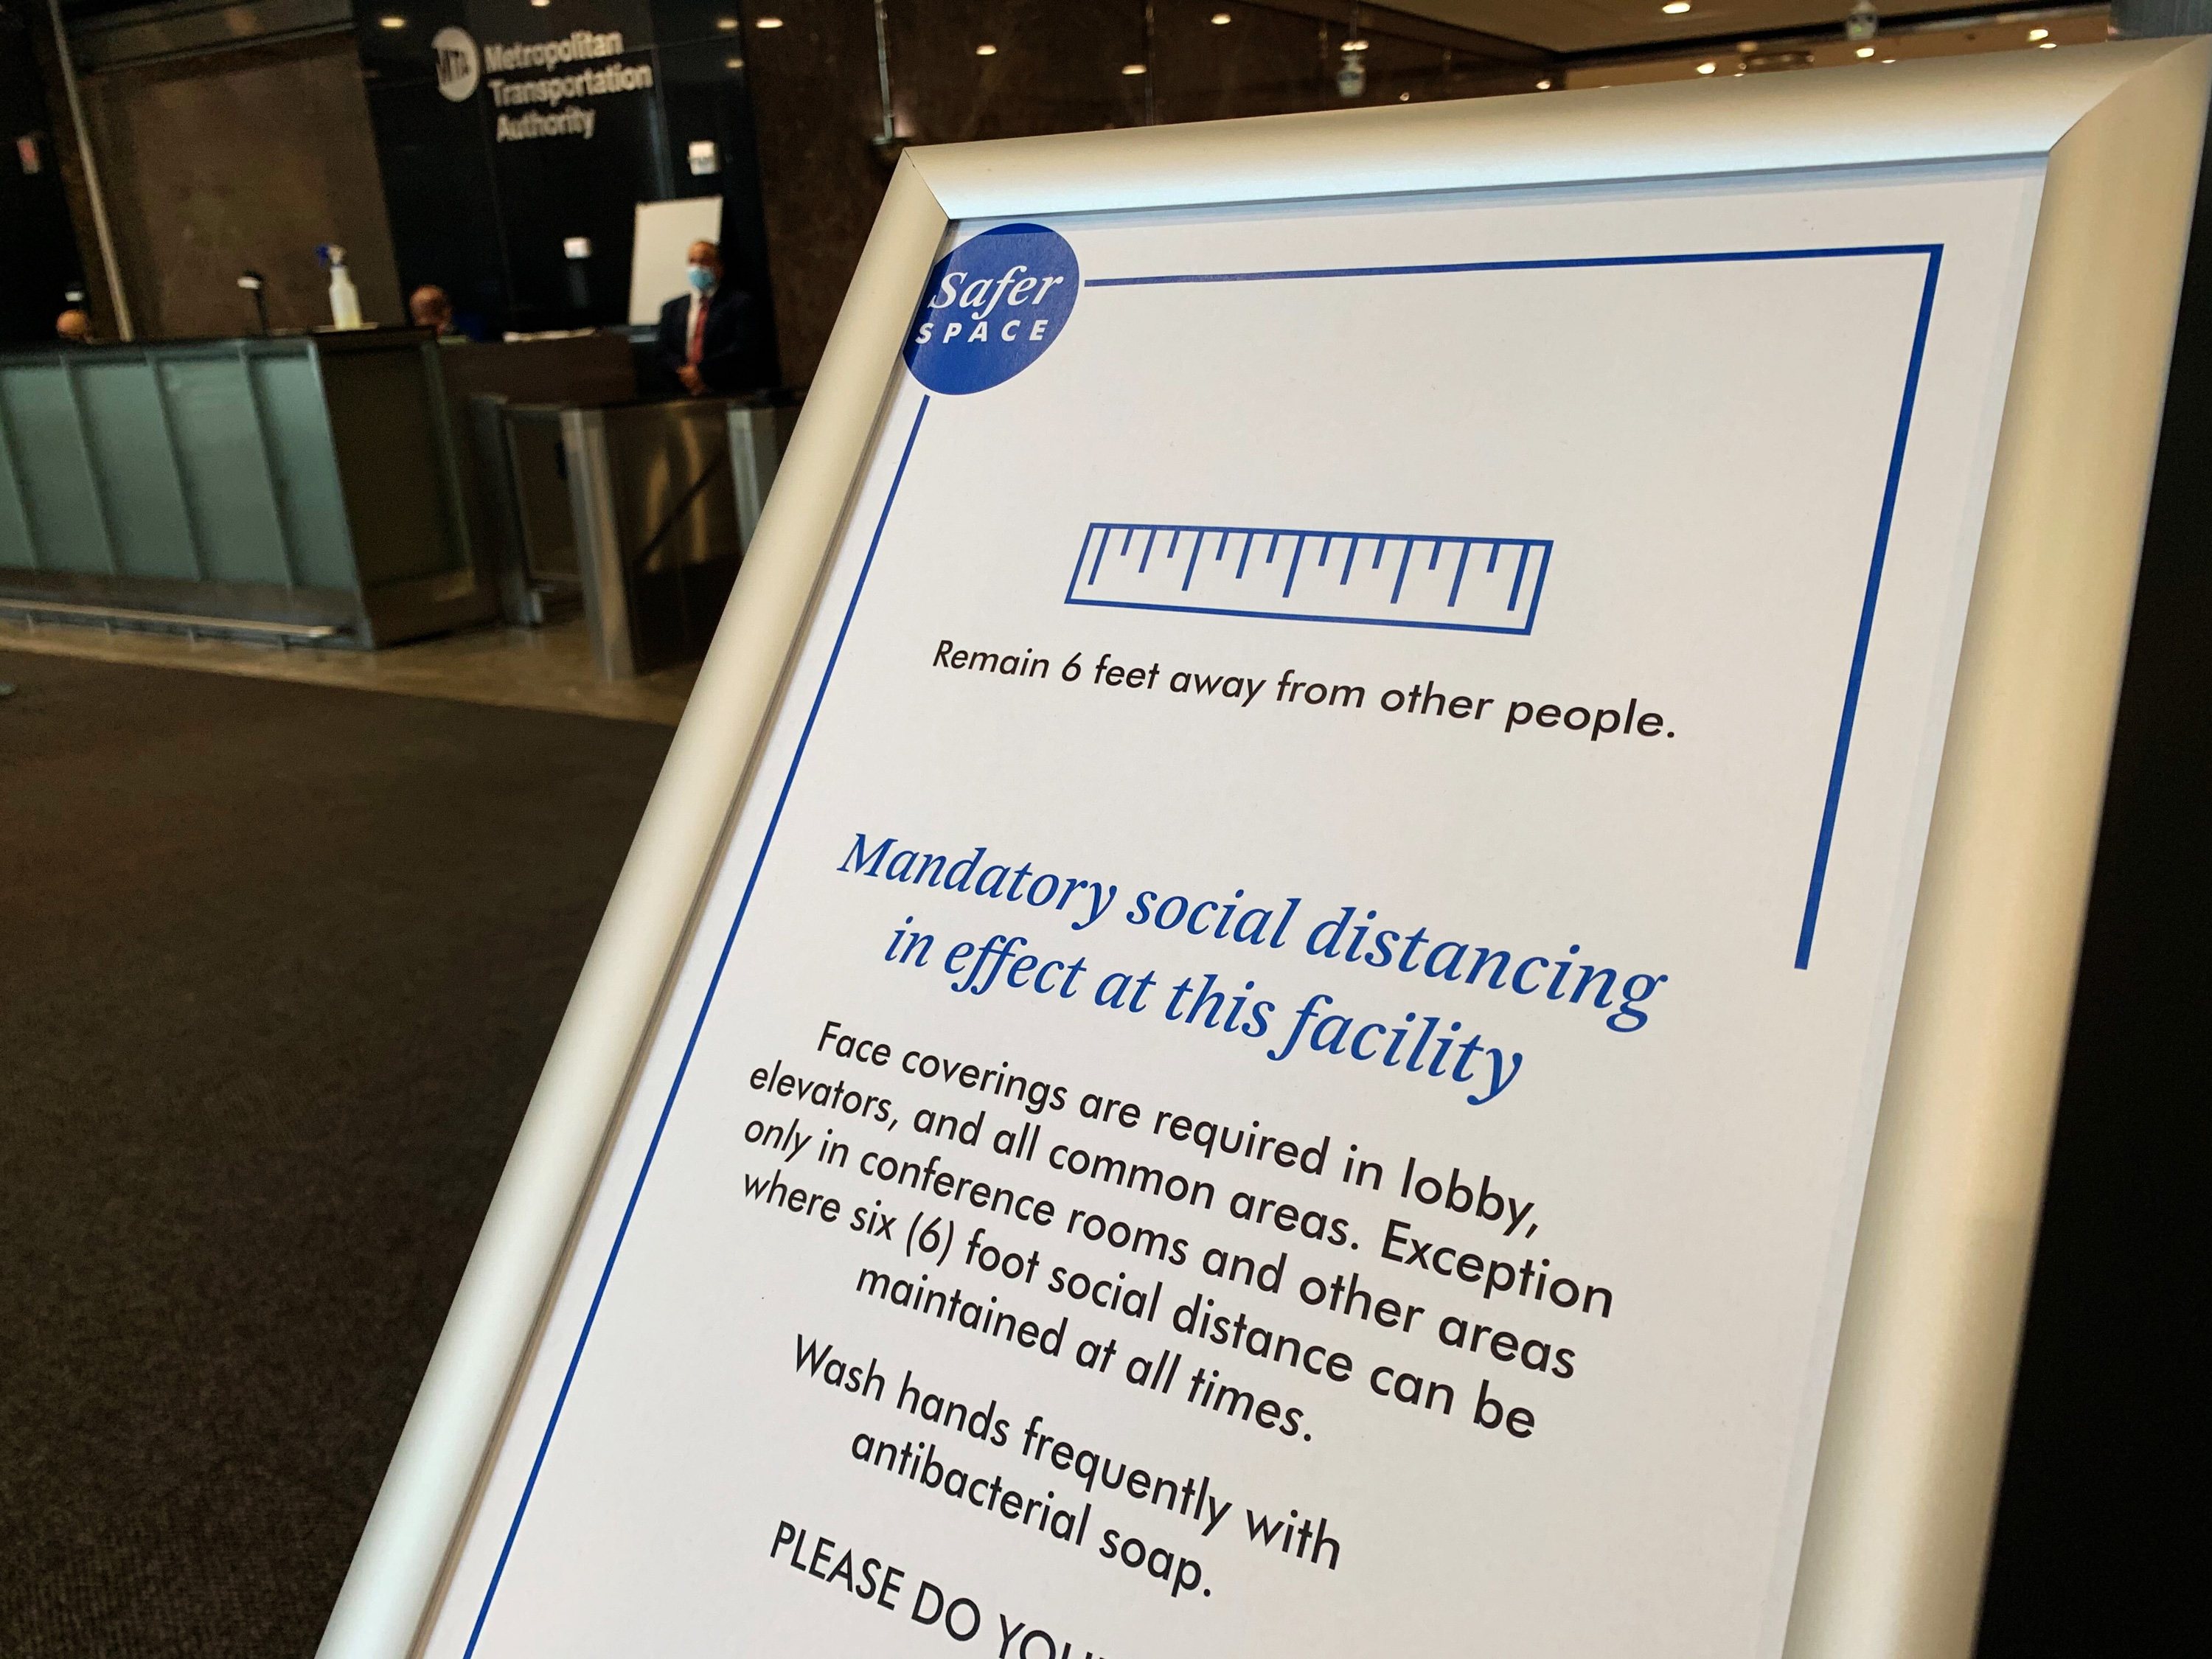 A sign at MTA headquarters gives reminders of social distancing rules, among other requirments.